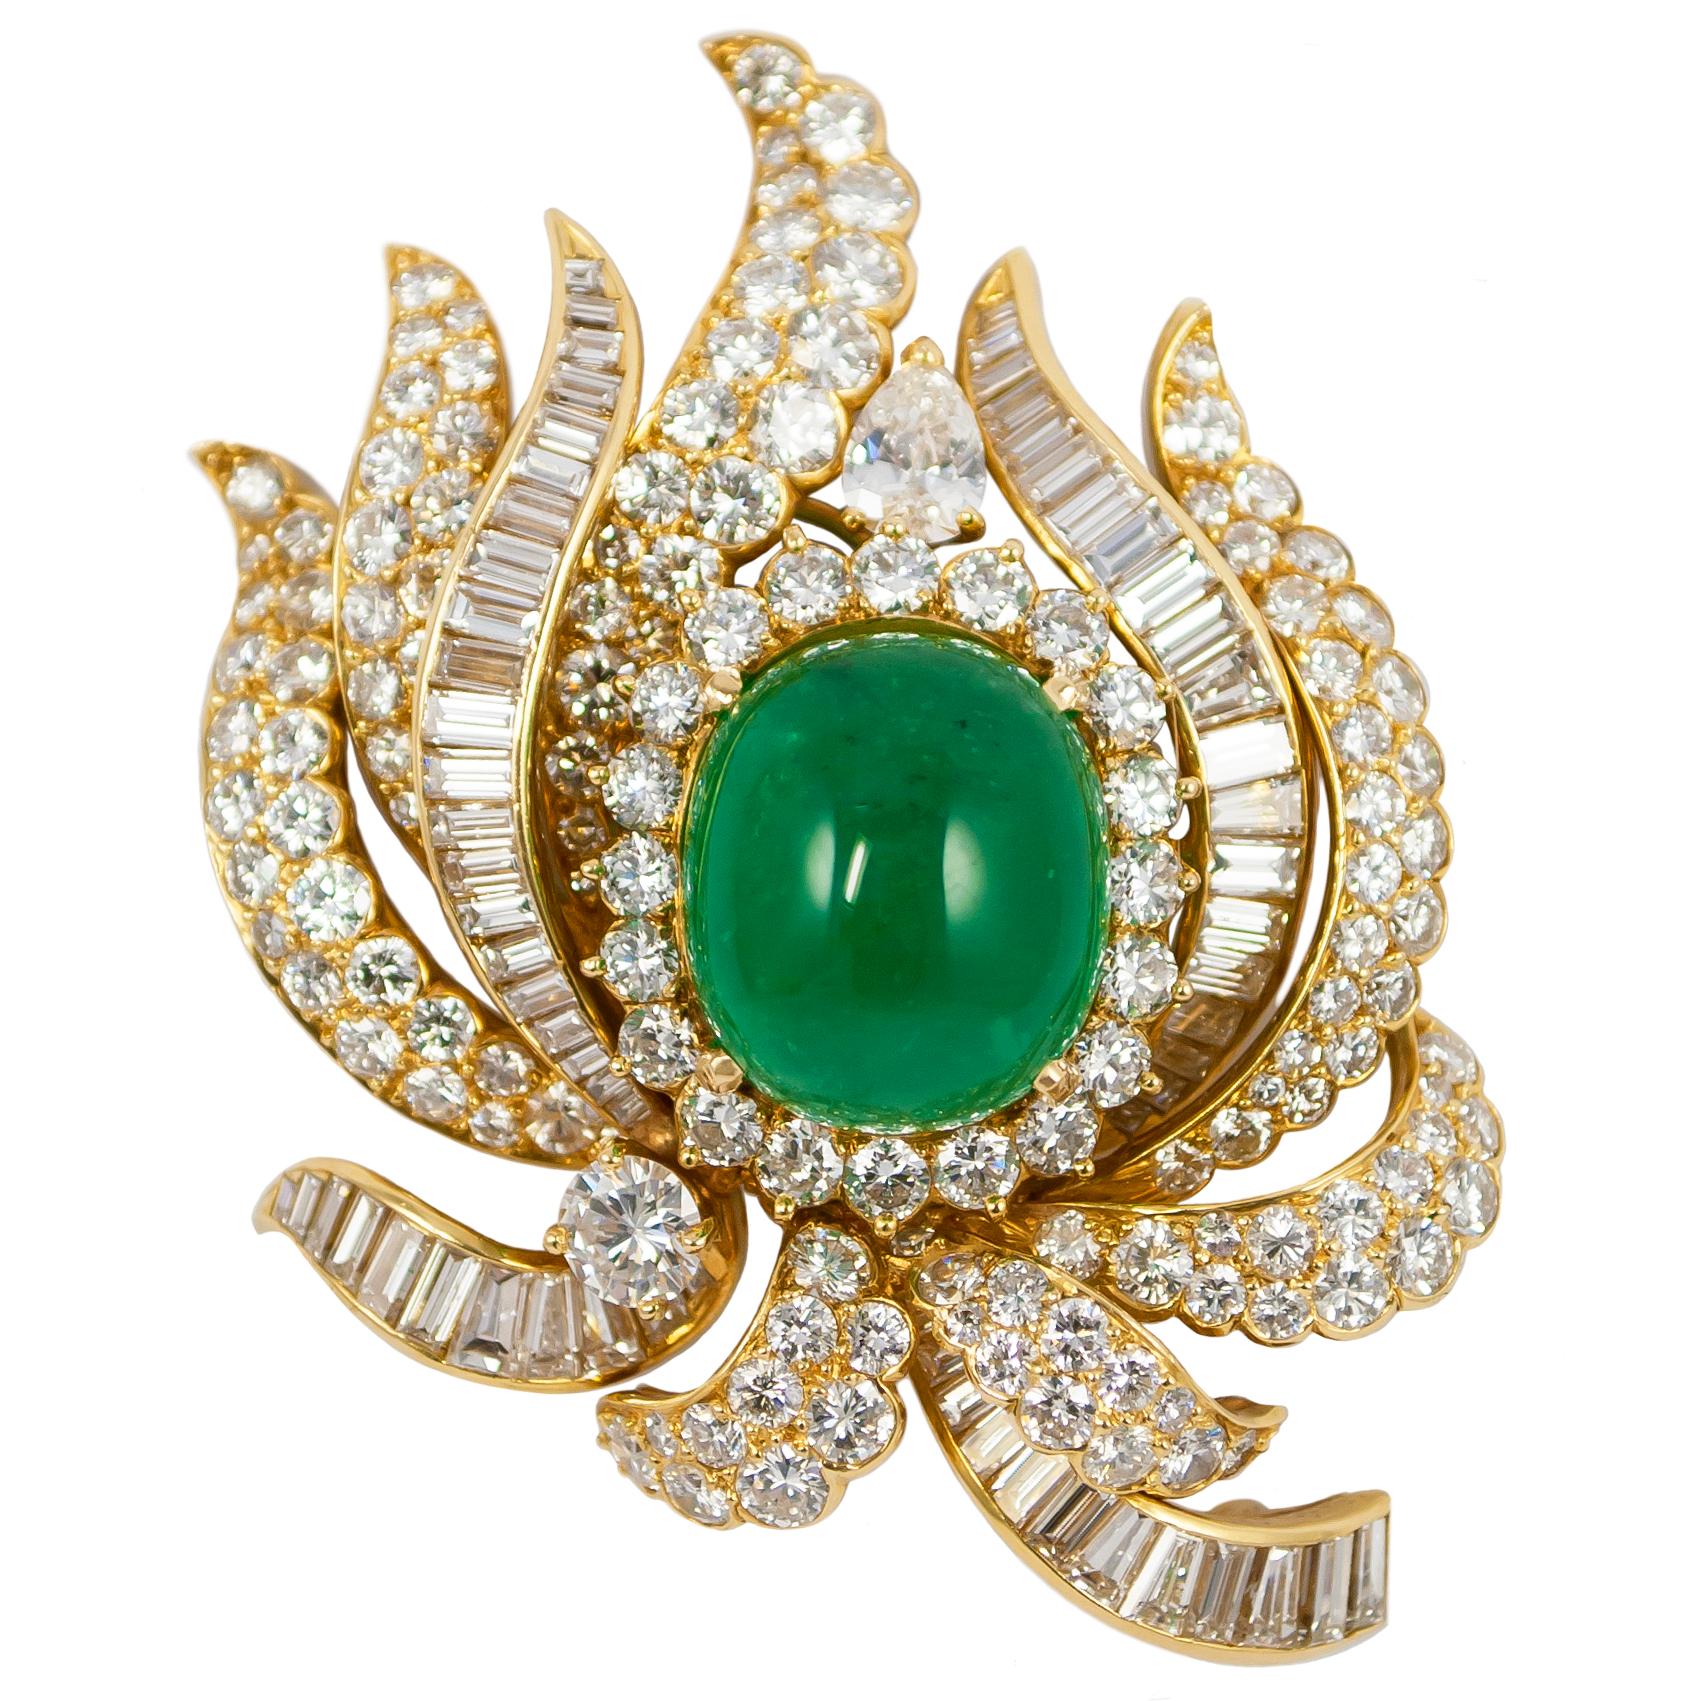 This magnificent signed Cartier brooch features a breathtaking Emerald cabochon bejeweled with scintillating diamonds... Set in rich 18K yellow gold, the craftsmanship of this piece is unparalleled; the juxtaposition of brilliant and step cut